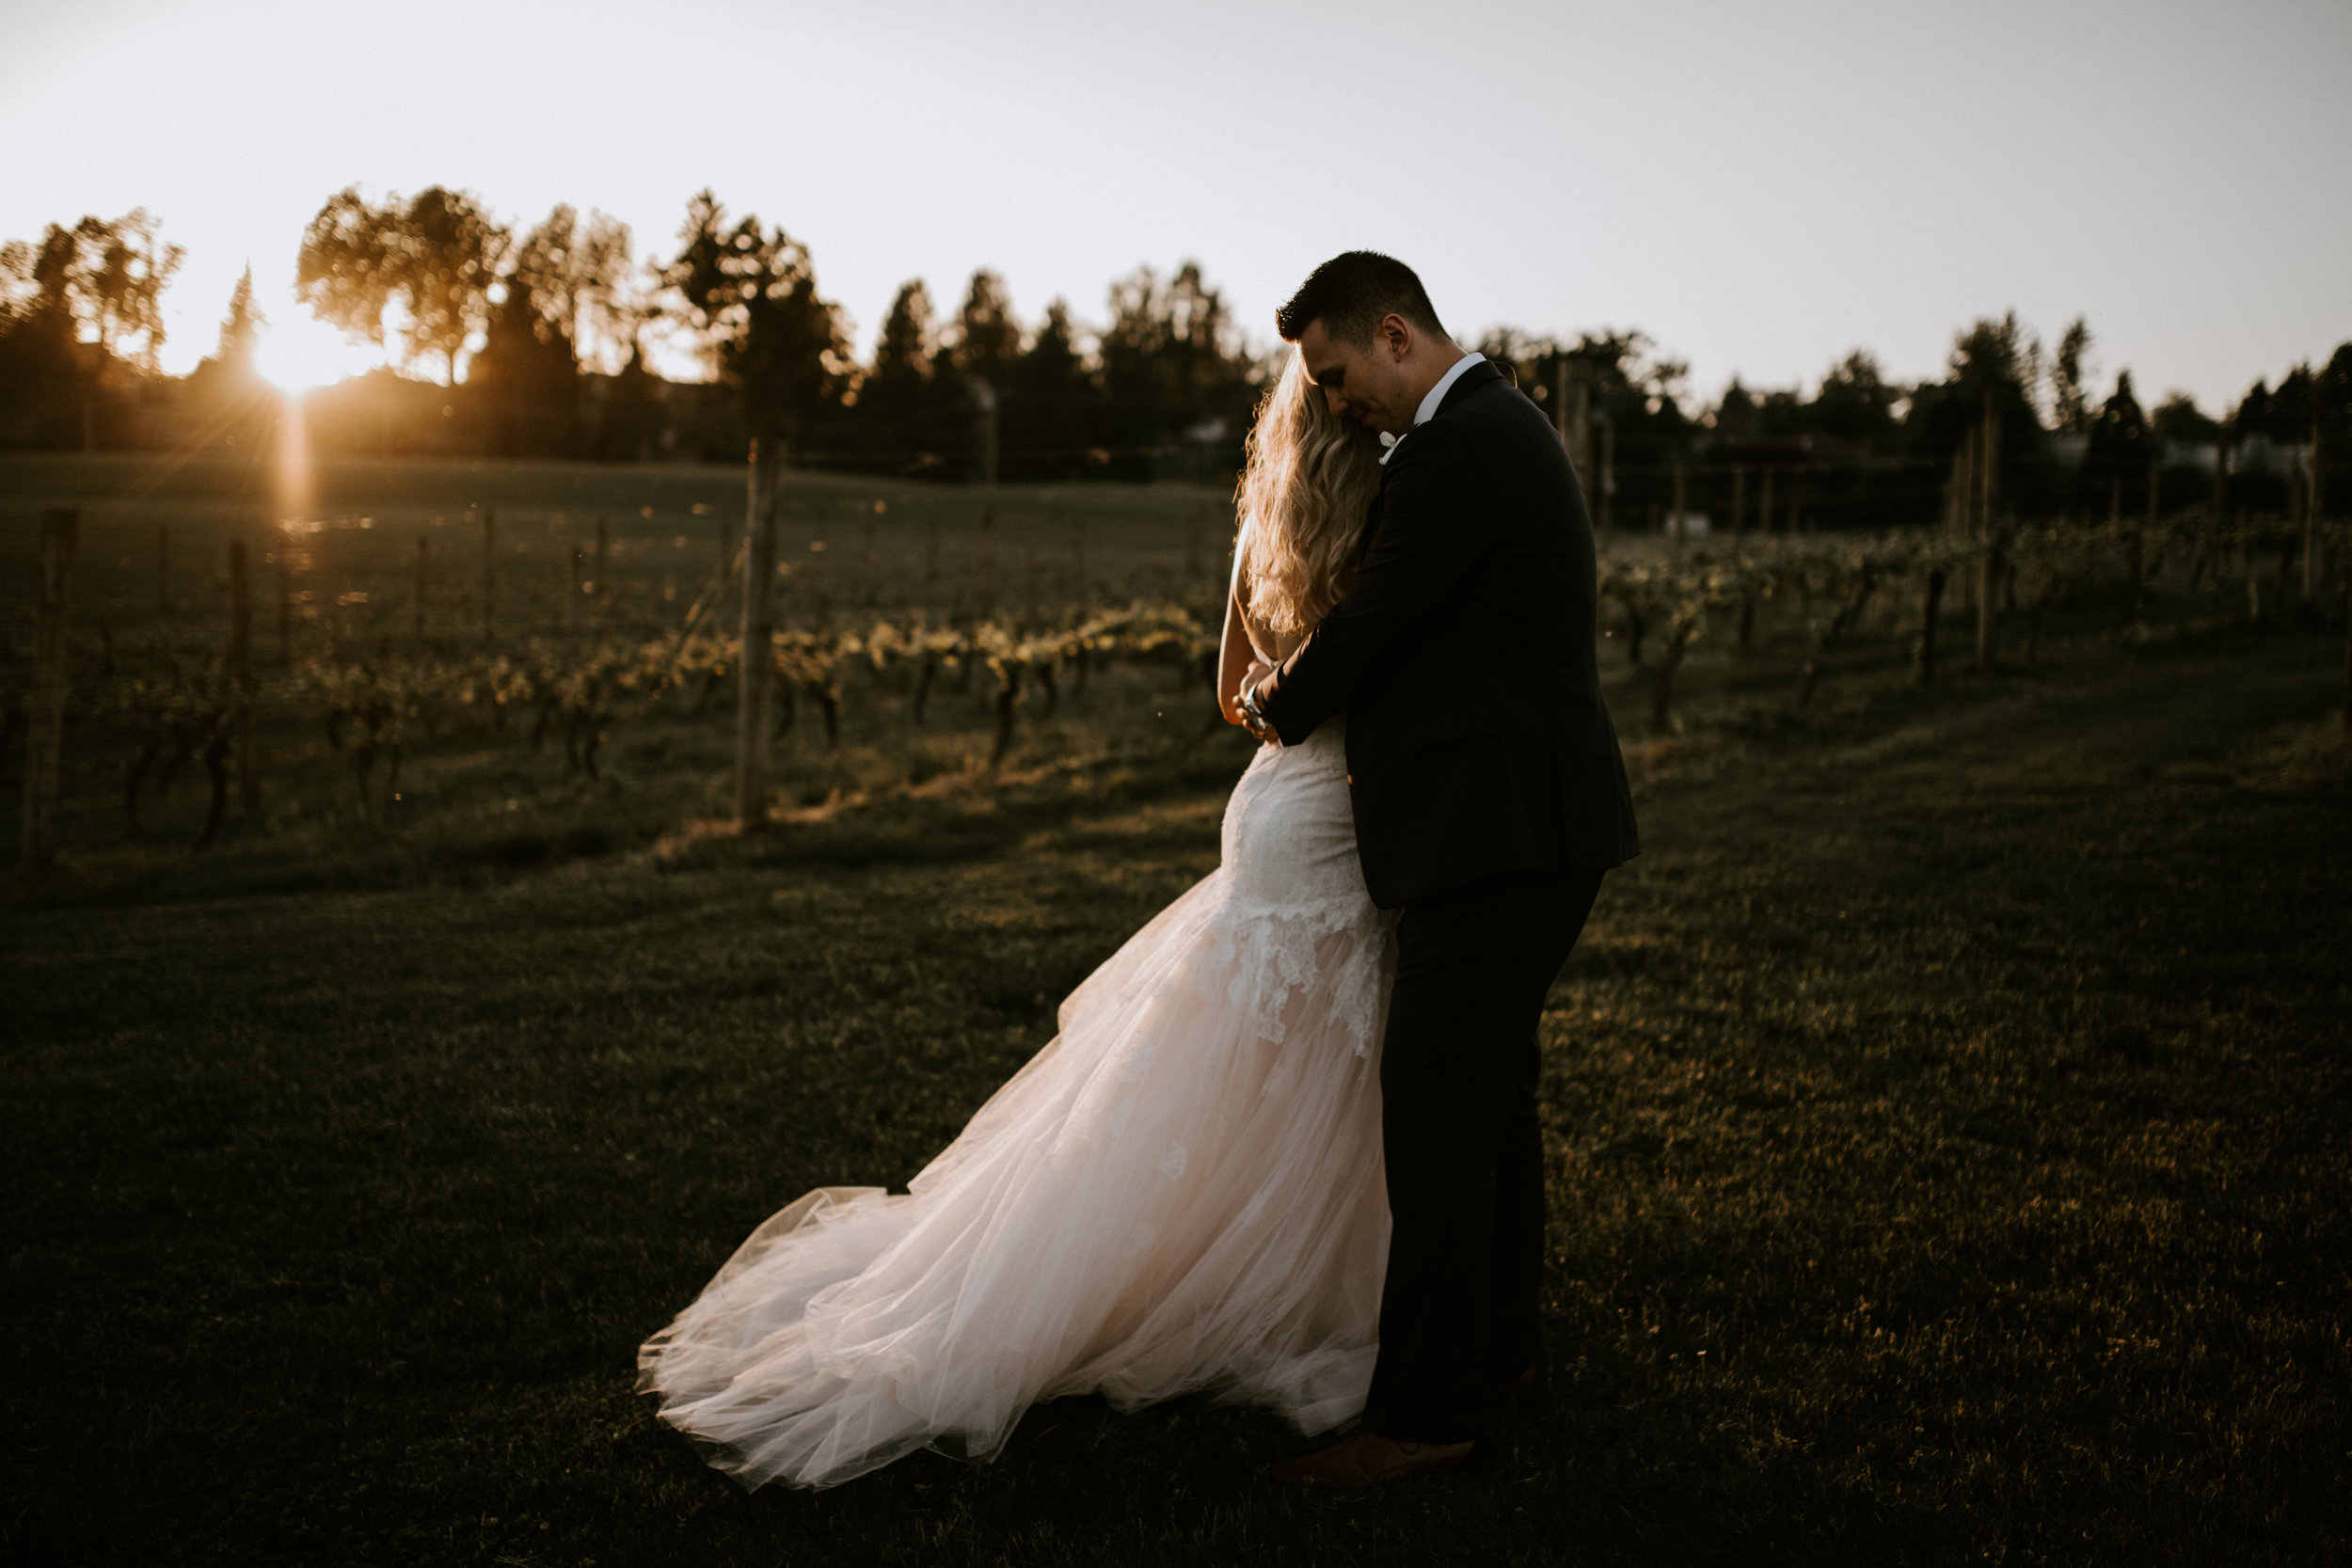 Bride and Groom photo during sunset at their wedding at Mount Lehman Winery in Abbotsford